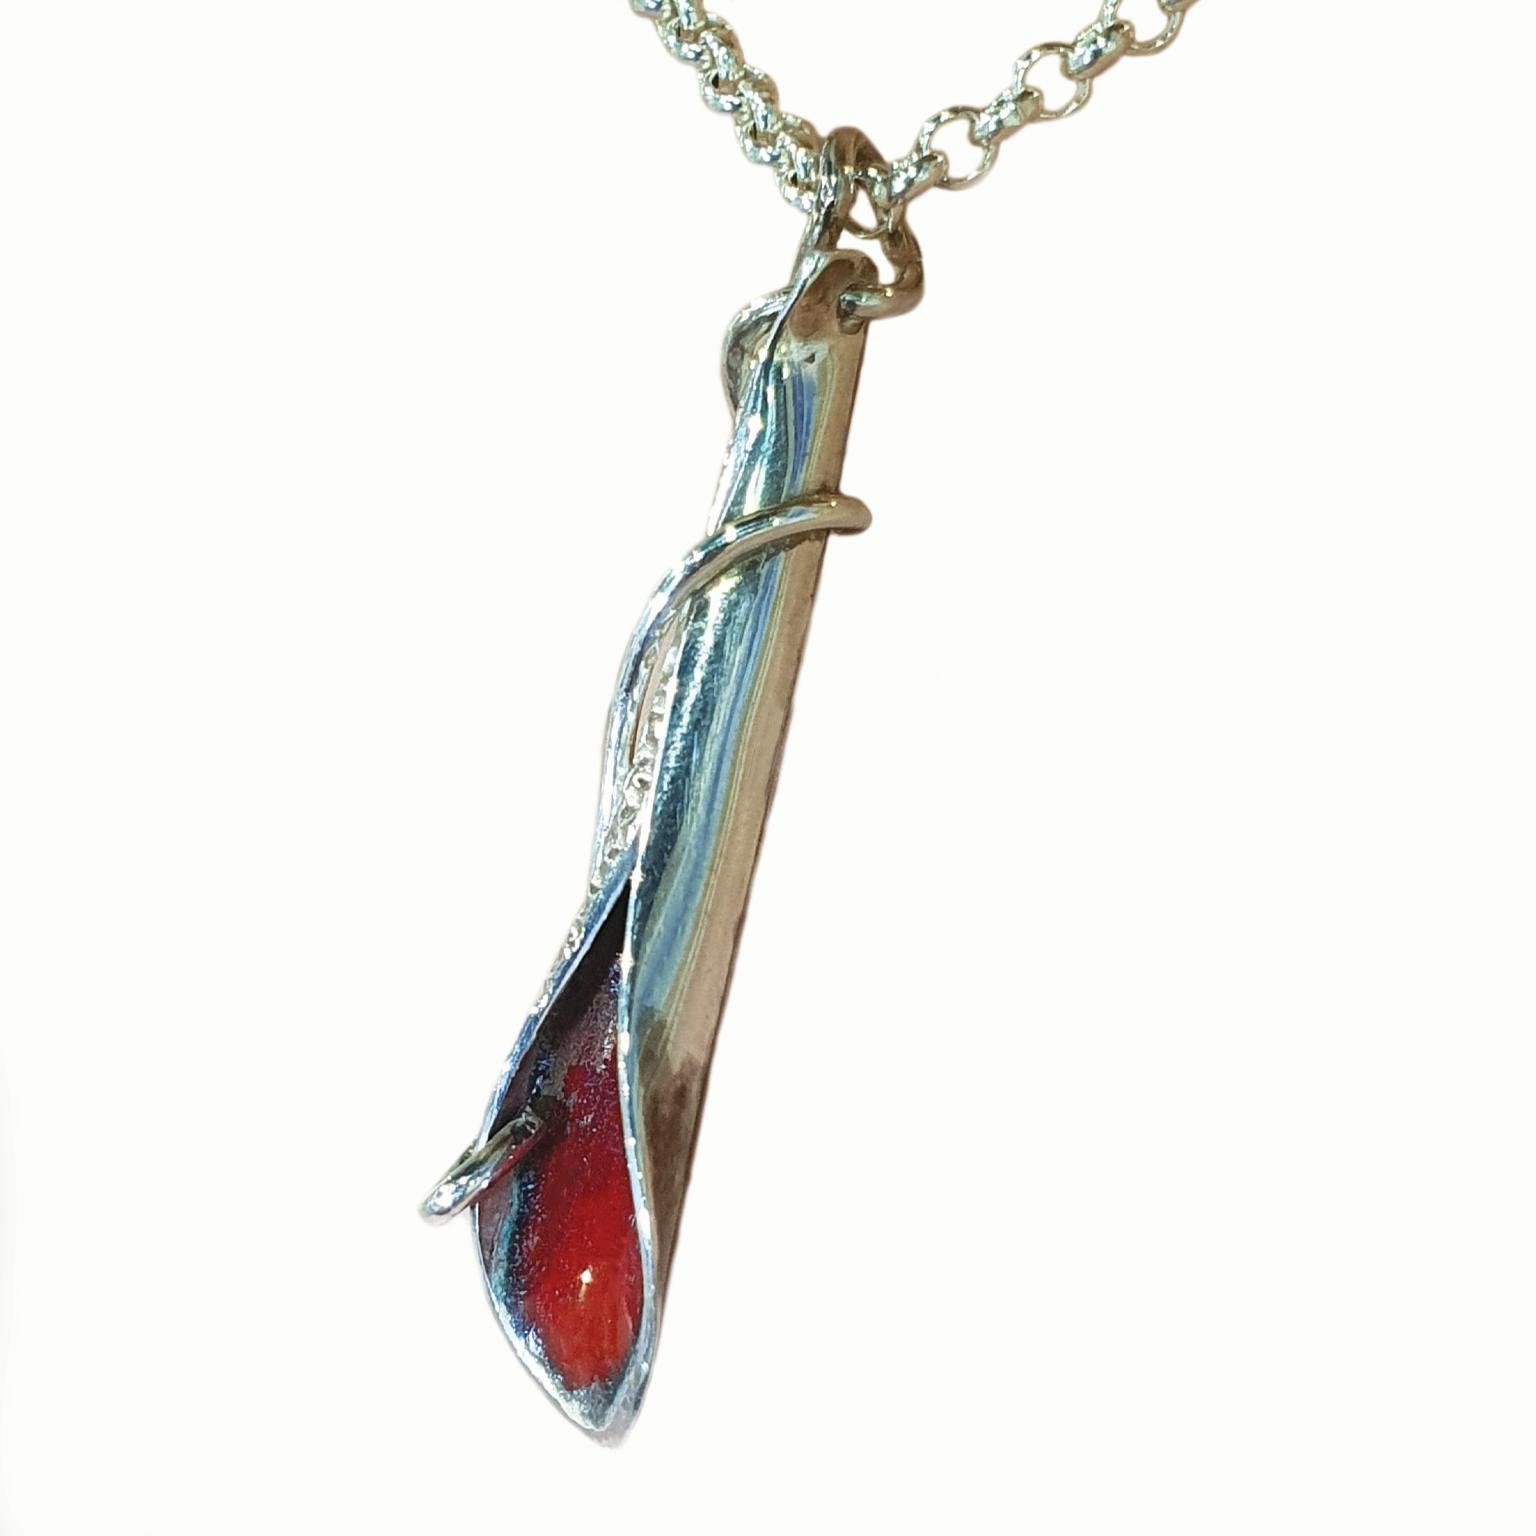 Paul Amey’s Red leaf pendant was crafted from tarnish resistant Sterling Silver. The pendant features Paul Amey’s signature pin finish texture and red enamel. The pendant weighs 2.5 grams and measures 39mm by 9mm.

The Red leaf pendant was designed